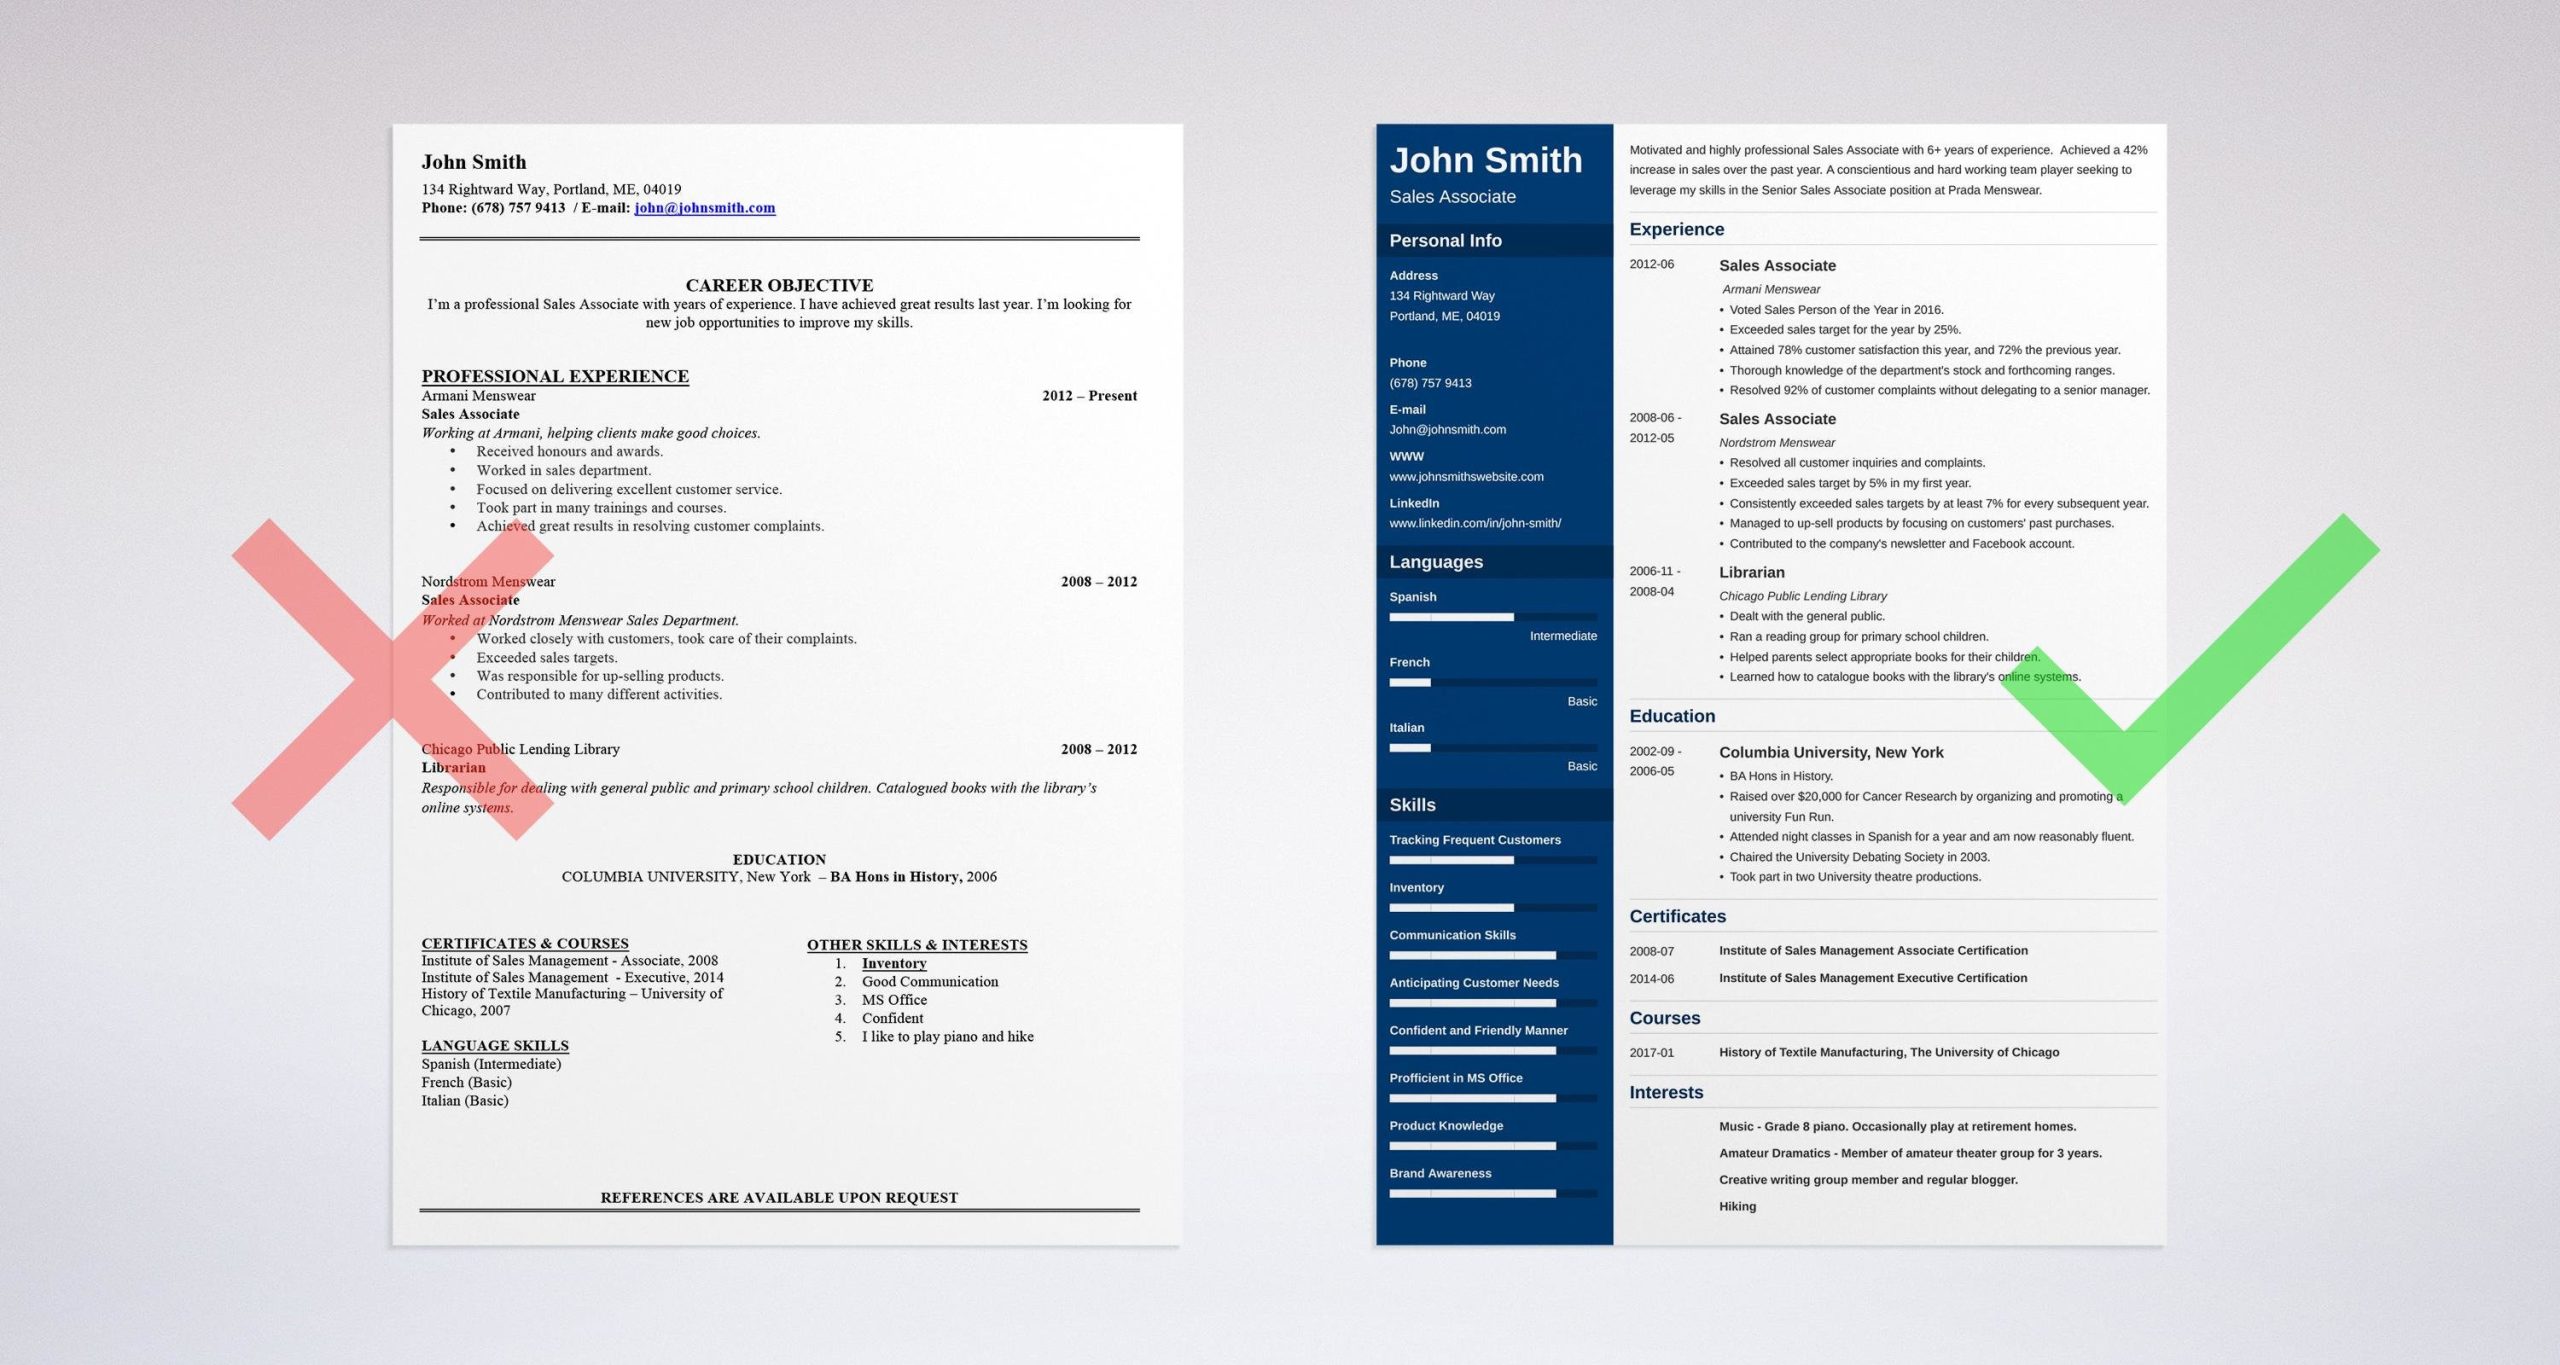 Sample Objectives for Resumes for Sales associate Sales associate Resume [example   Job Description]